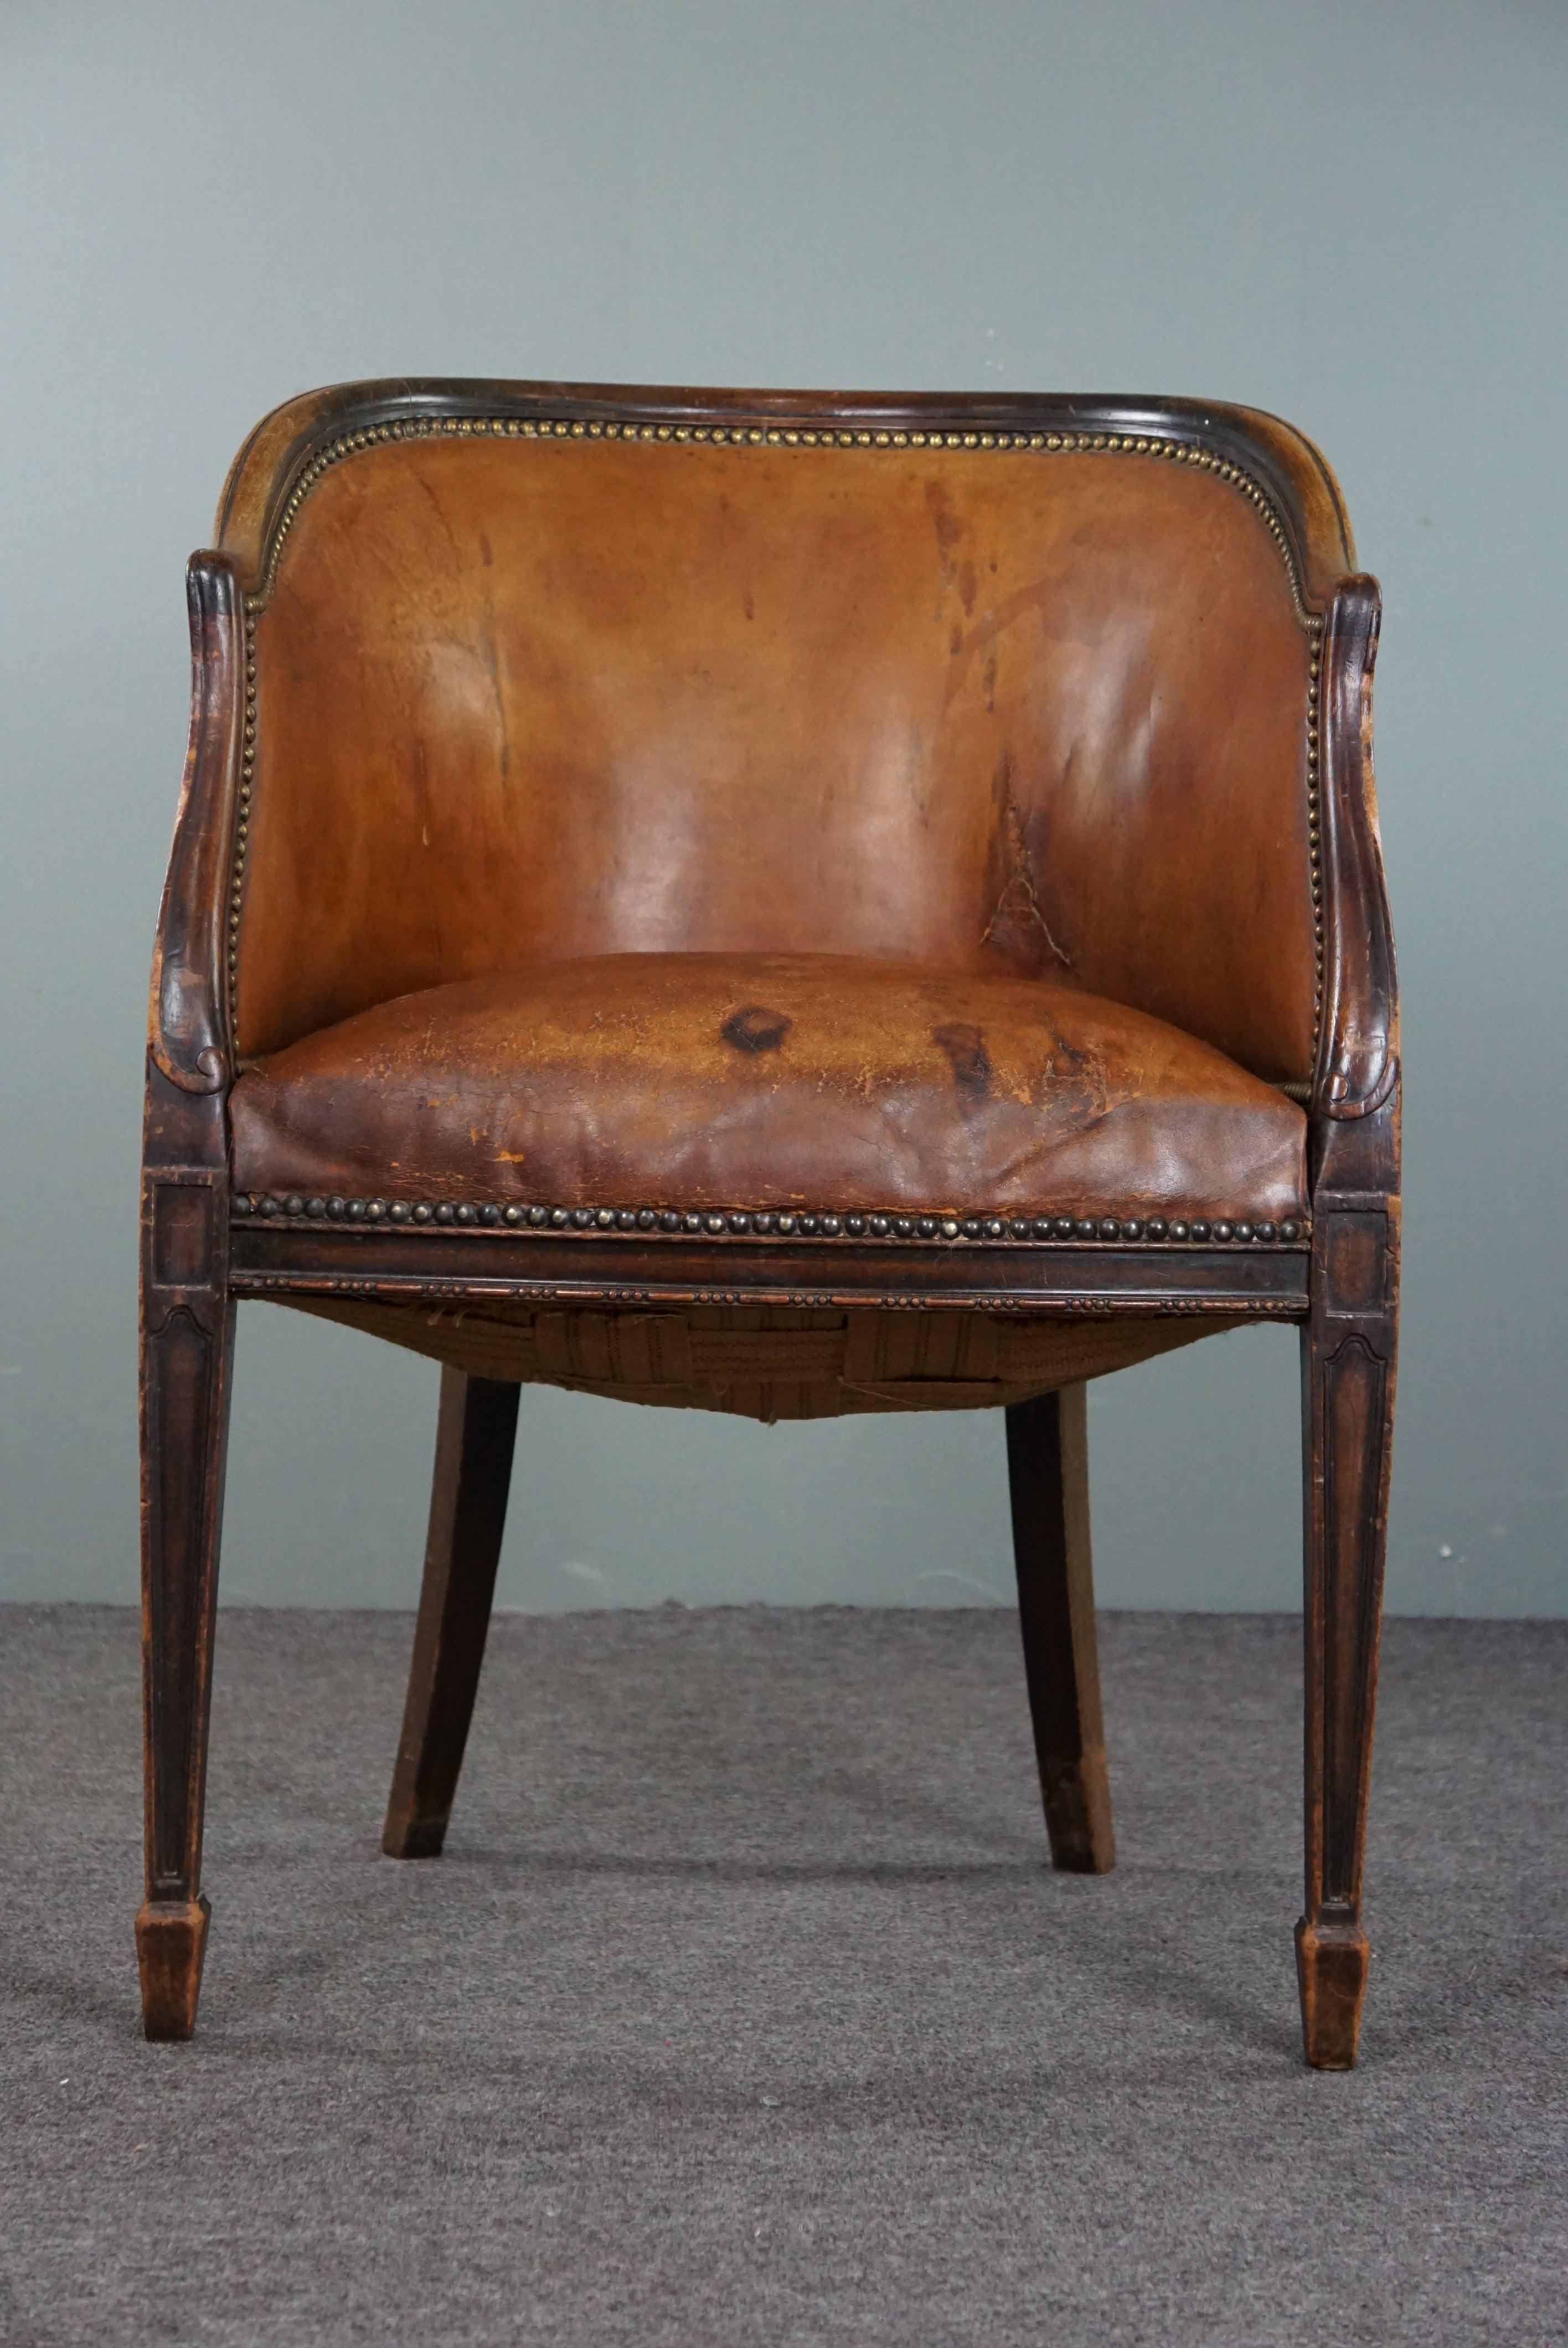 Cognac-colored antique leather tub chair with beautiful patina In Fair Condition For Sale In Harderwijk, NL